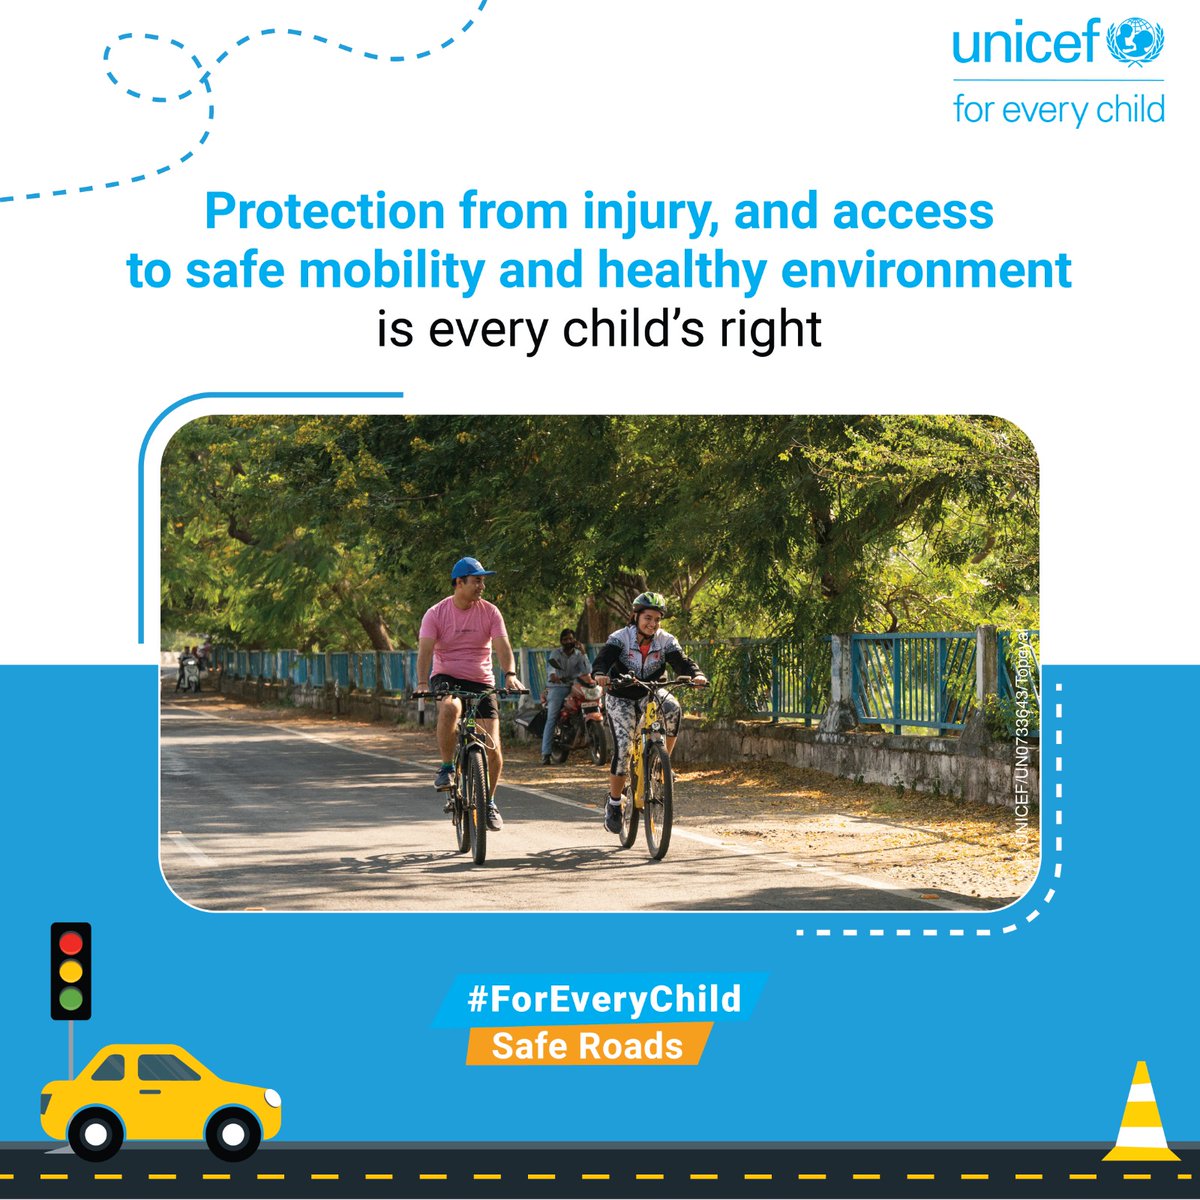 UNICEF believes that every child should survive and thrive in a healthy and safe environment. #ForEveryChild, safe roads